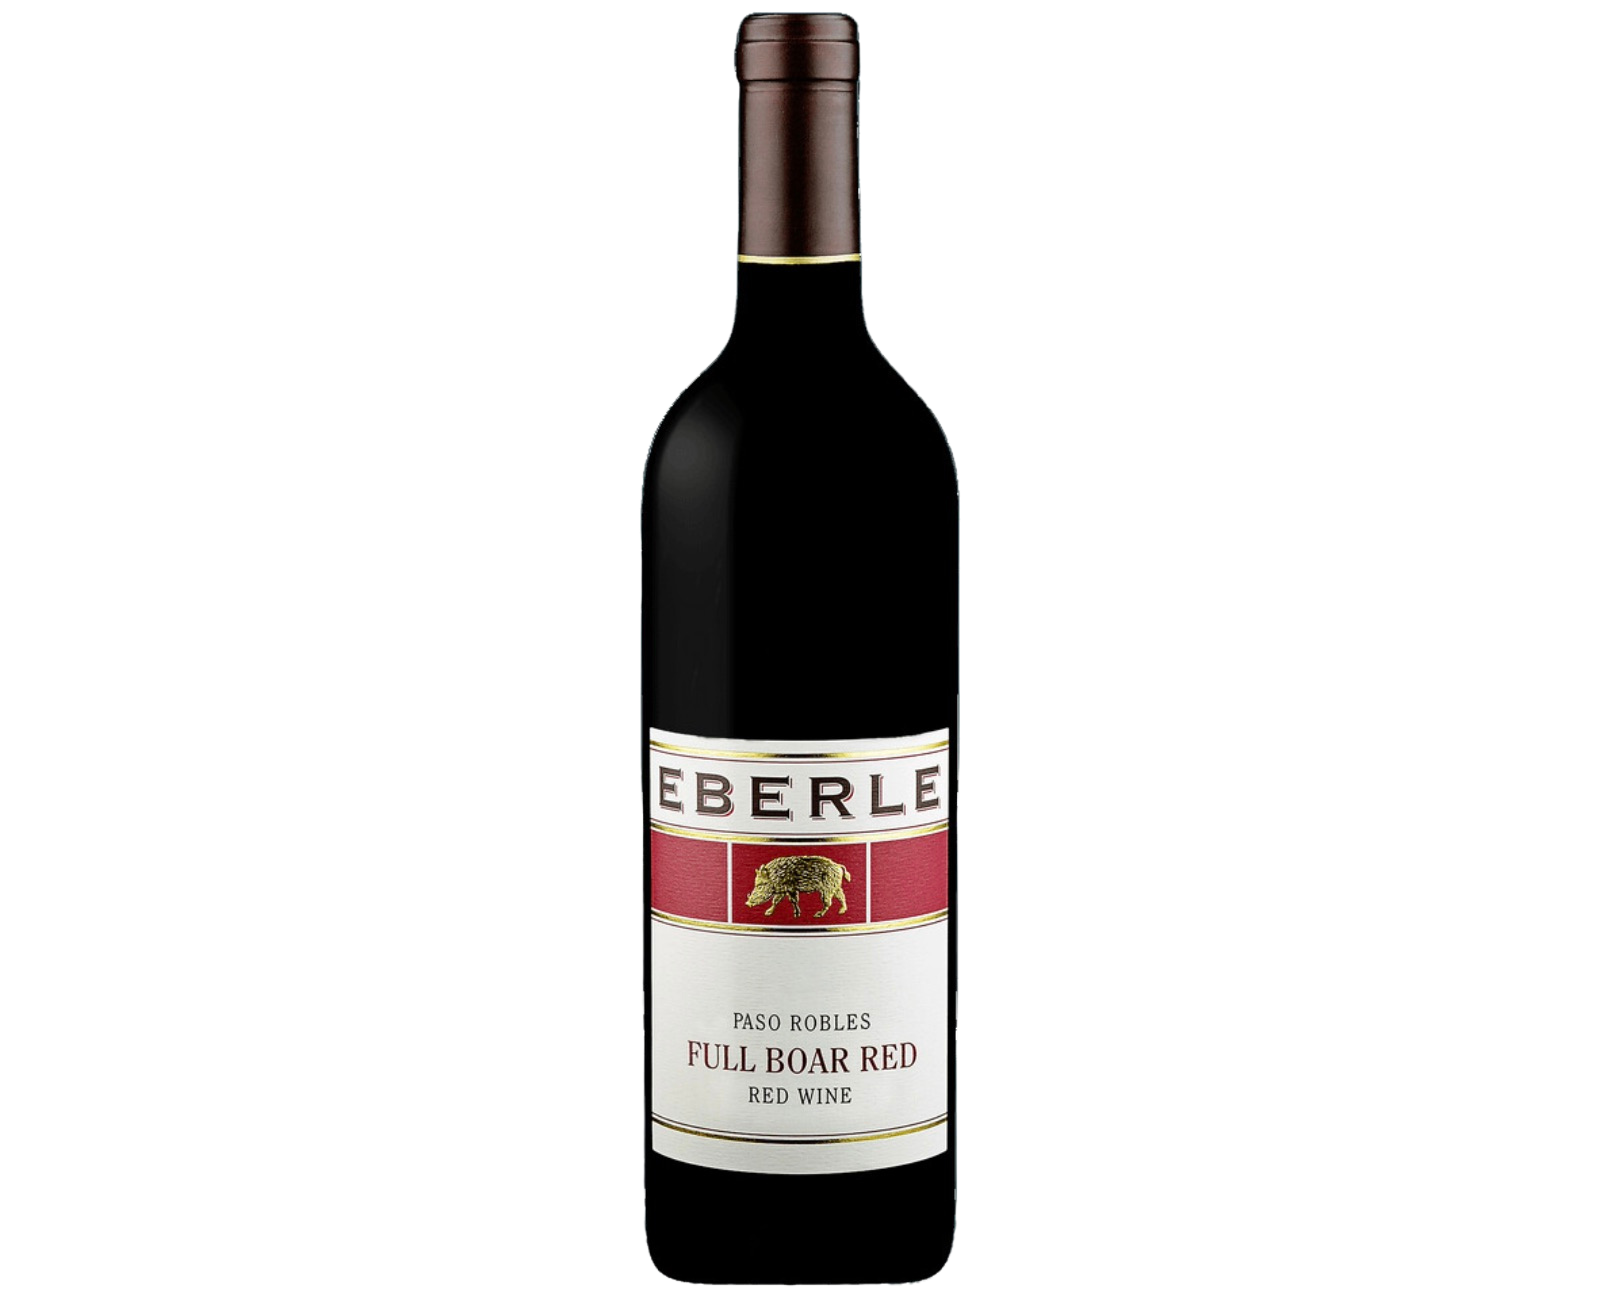 Eberle Non-Vintage Full Boar Red Blend, Paso Robles